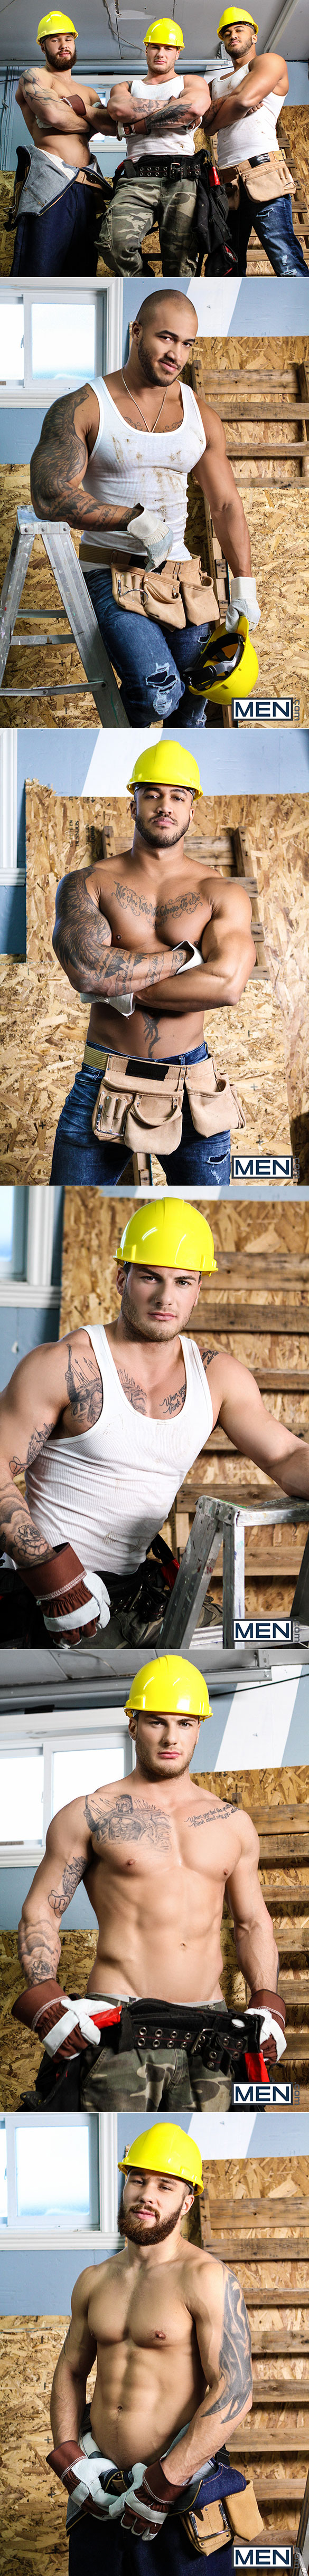 Men.com: Muscle studs Jason Vario, Morgan Blake and William Seed fuck Joey Mentana and Thyle Knoxx in "Men at Work"